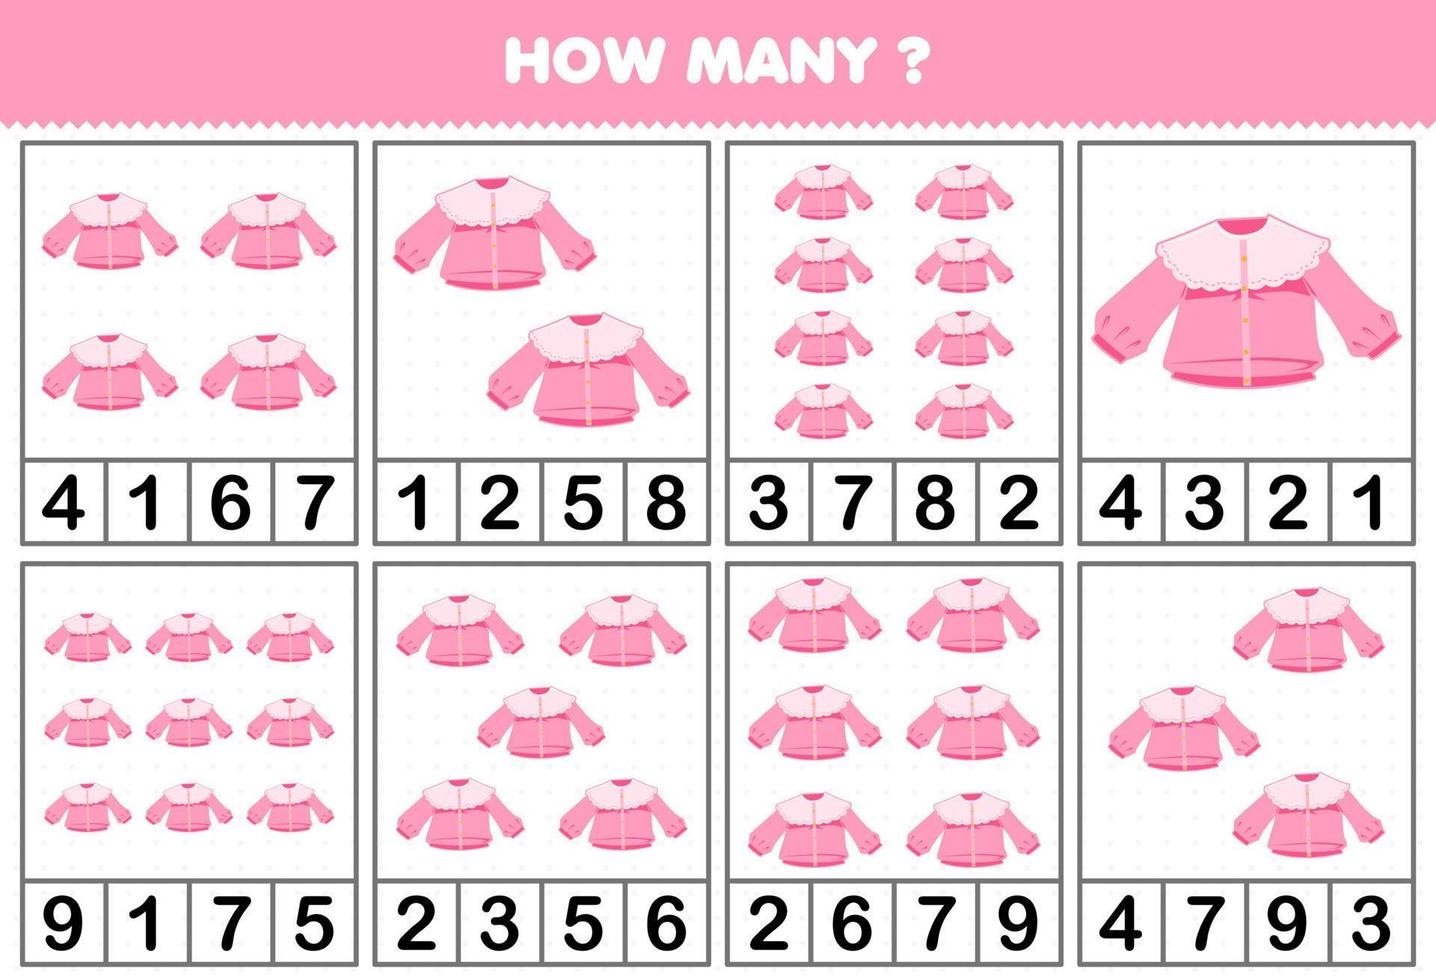 Education game for children counting how many objects in each table of cartoon wearable clothes pink blouse printable worksheet vector